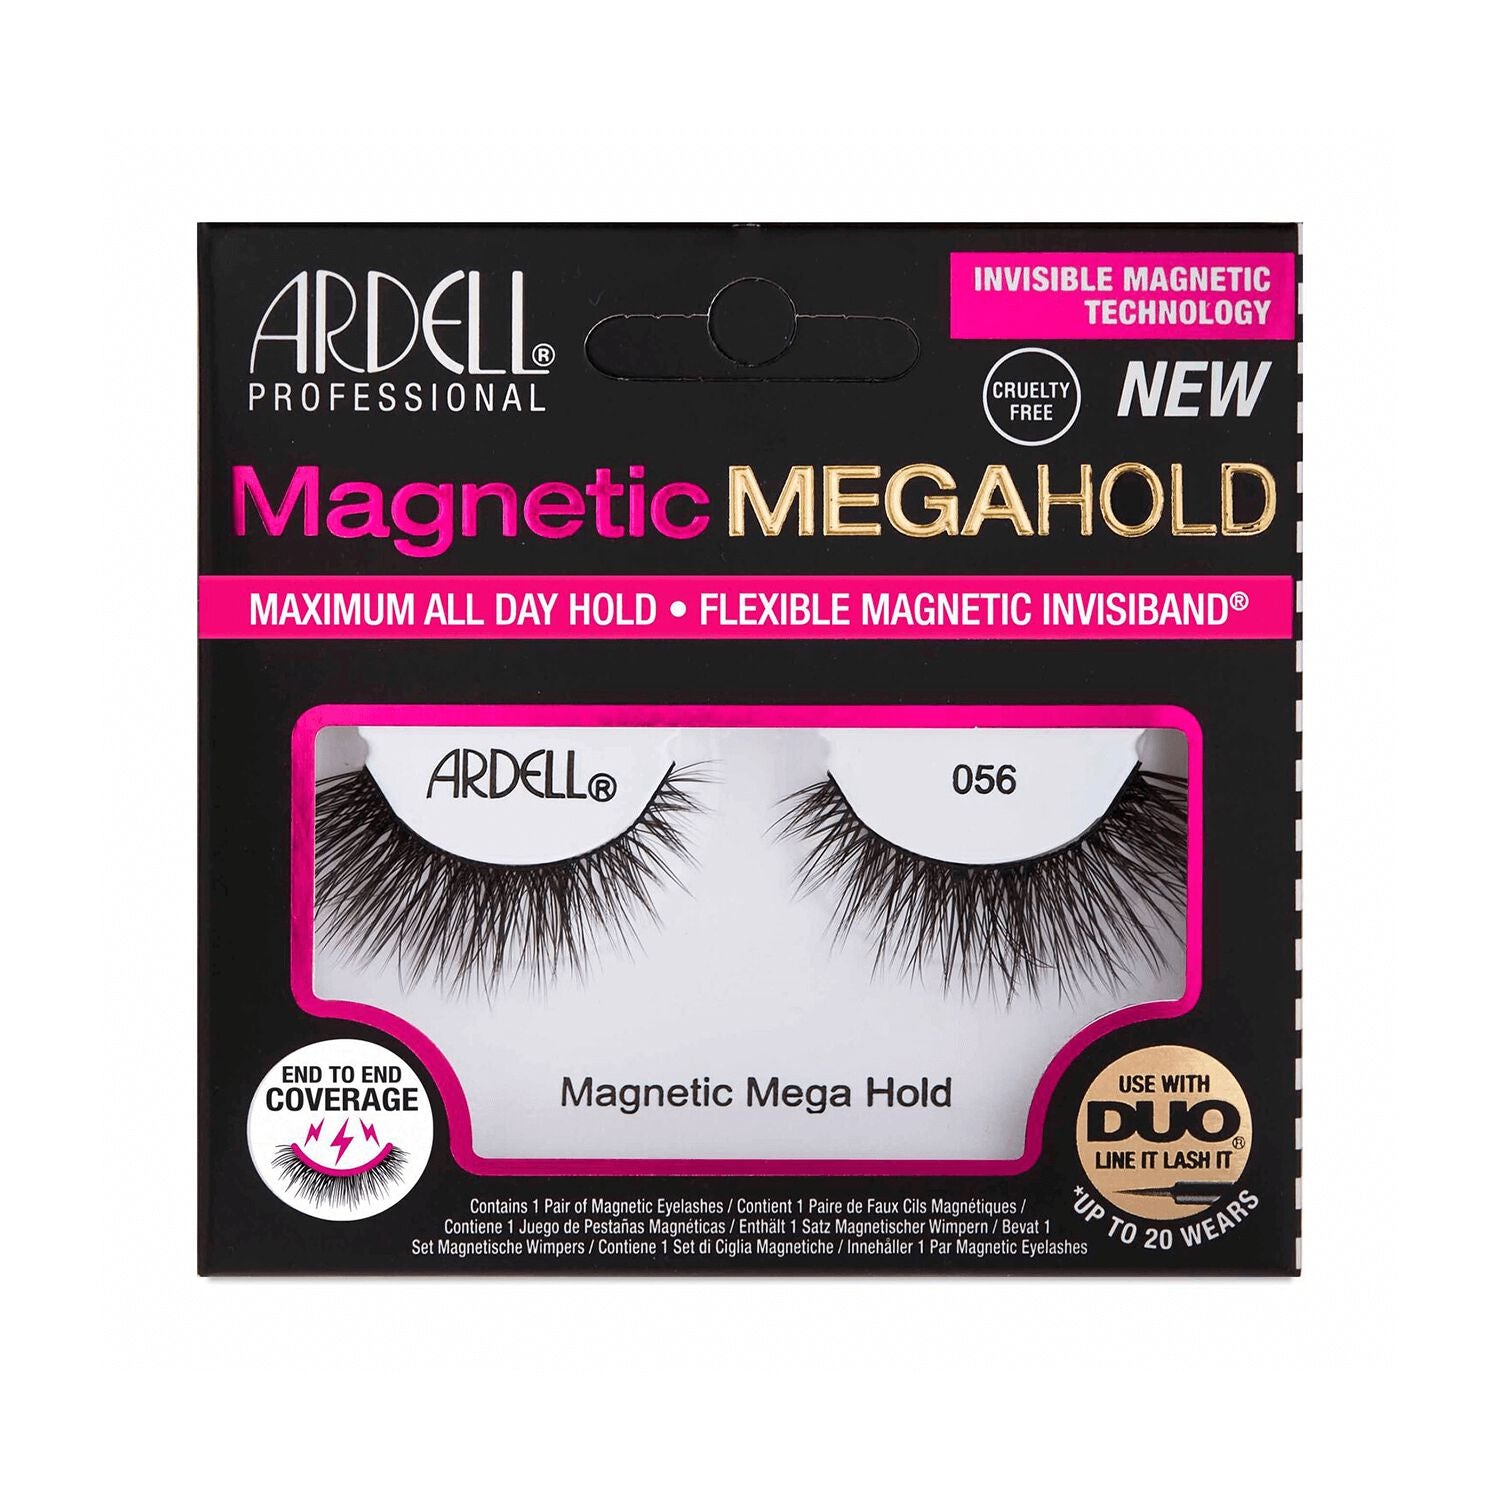 Magnetic Lashes  by   Ardell Magnetic Megahold Lashes #056